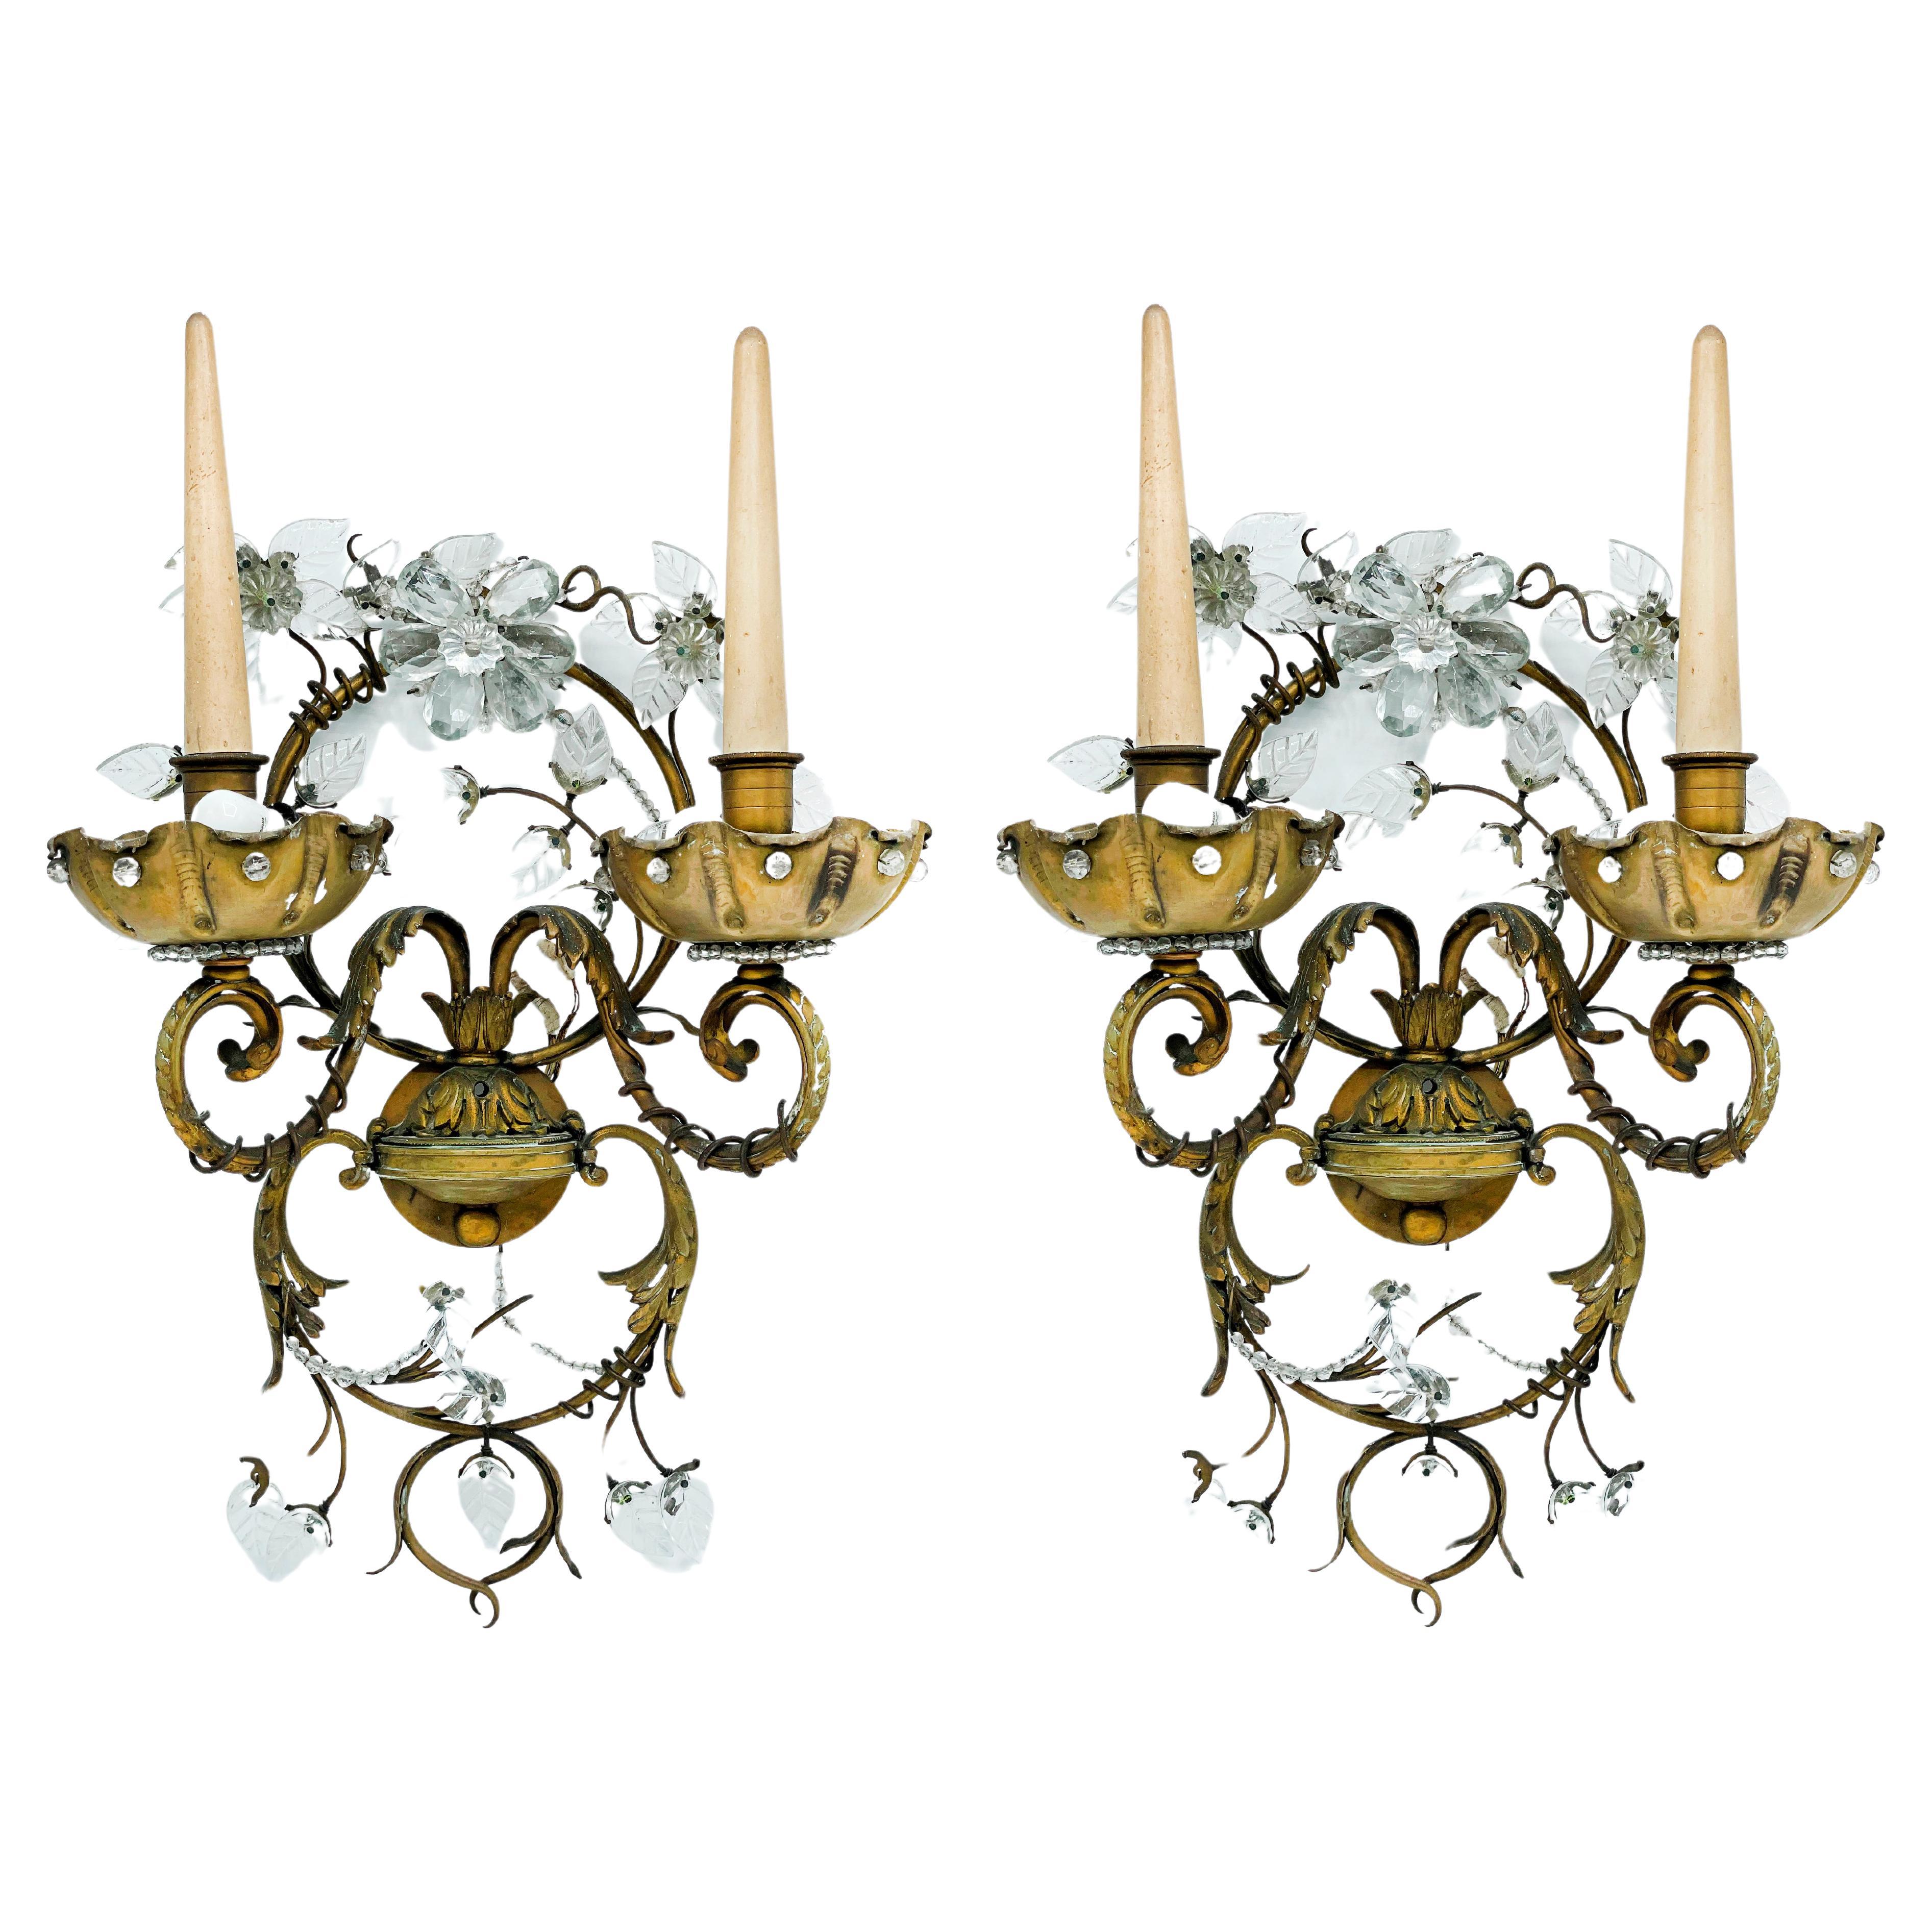 Pair of Fine French Modern Neoclassical Wall Lights Sconces by Maison Baguès. For Sale